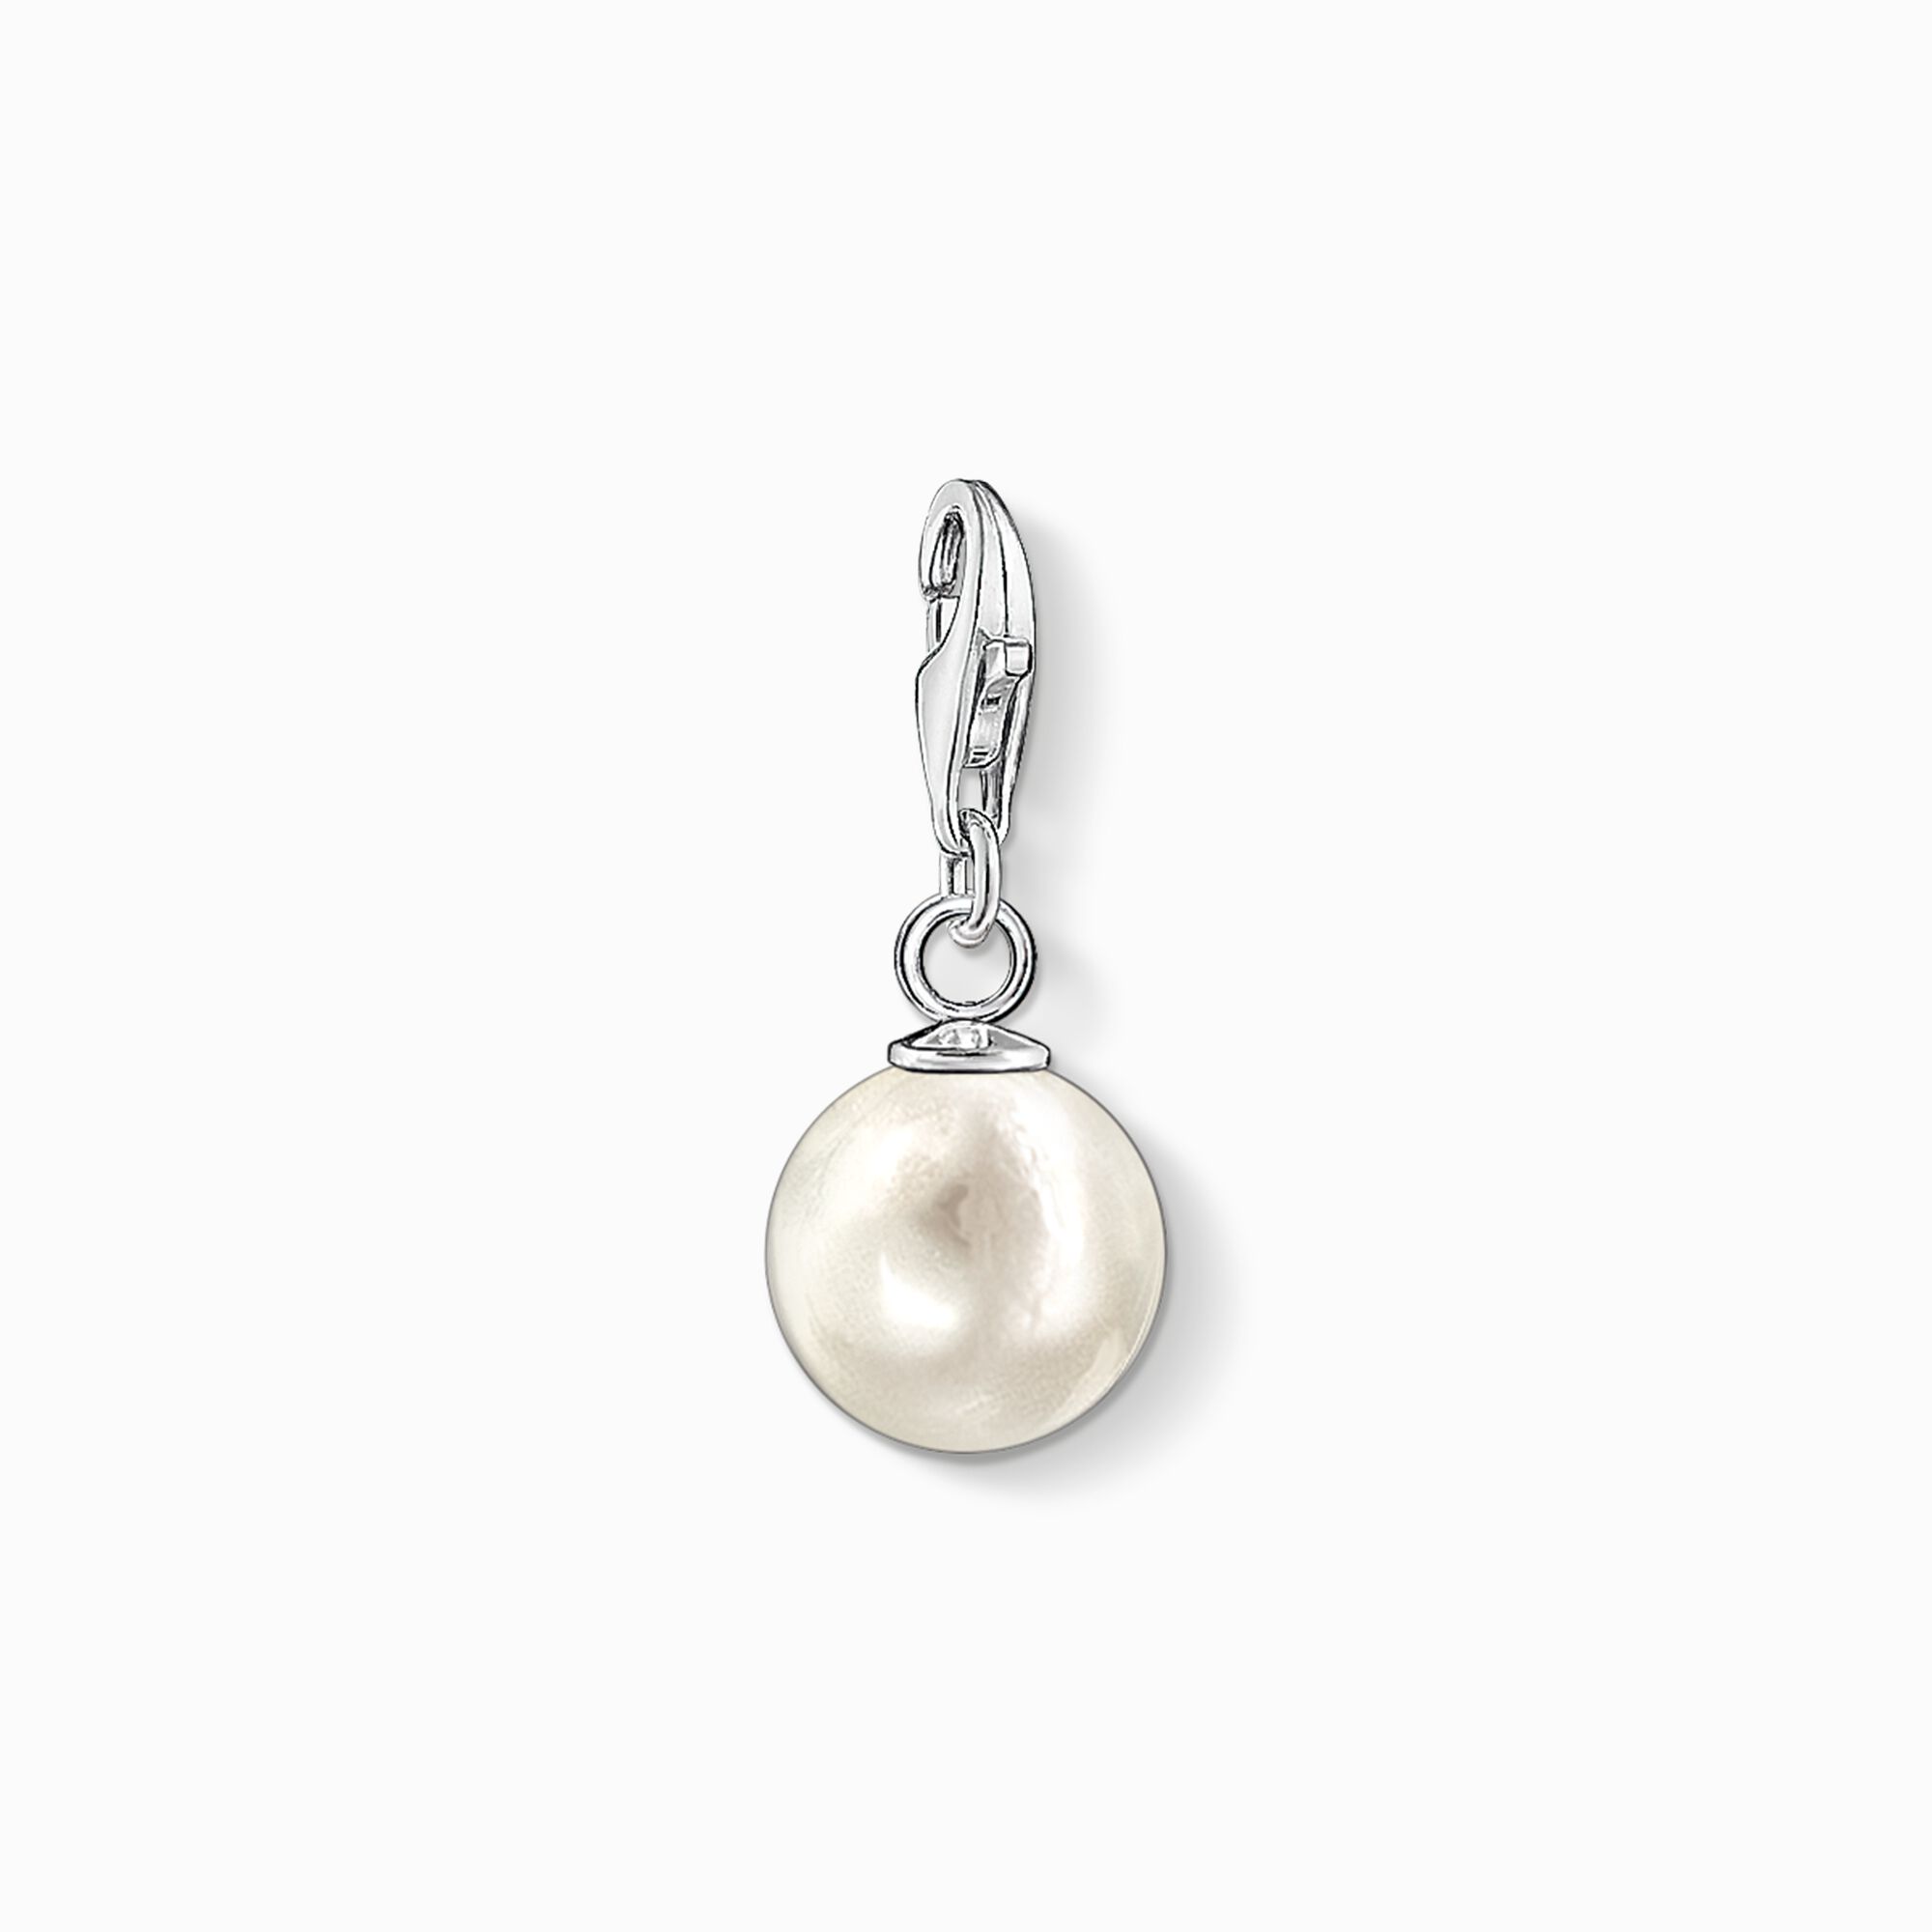 Charm pendant pearl from the Charm Club collection in the THOMAS SABO online store